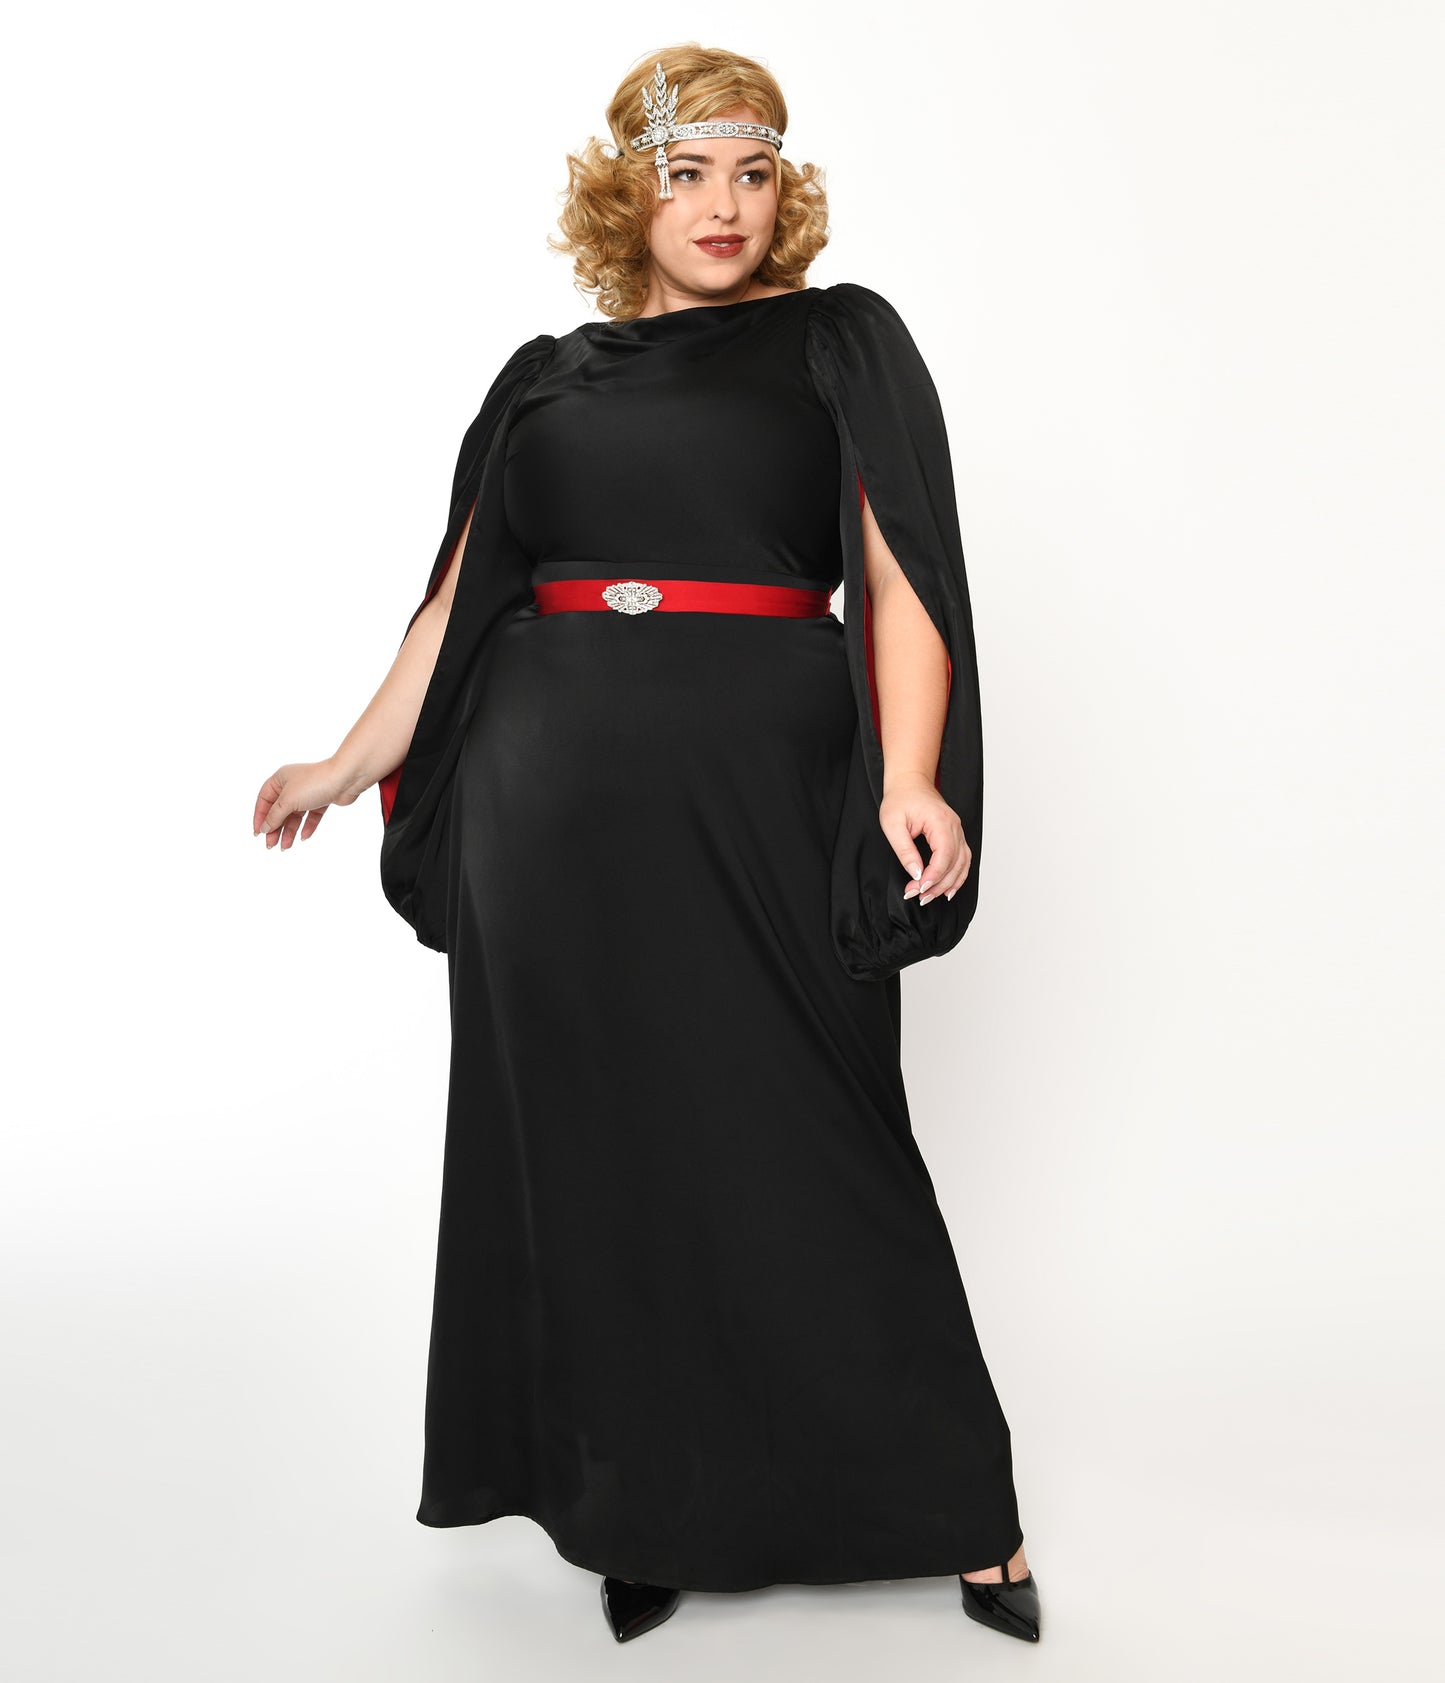 The Great Gatsby x Unique Vintage Plus Size Black Satin & Red Contrast Evening Gown